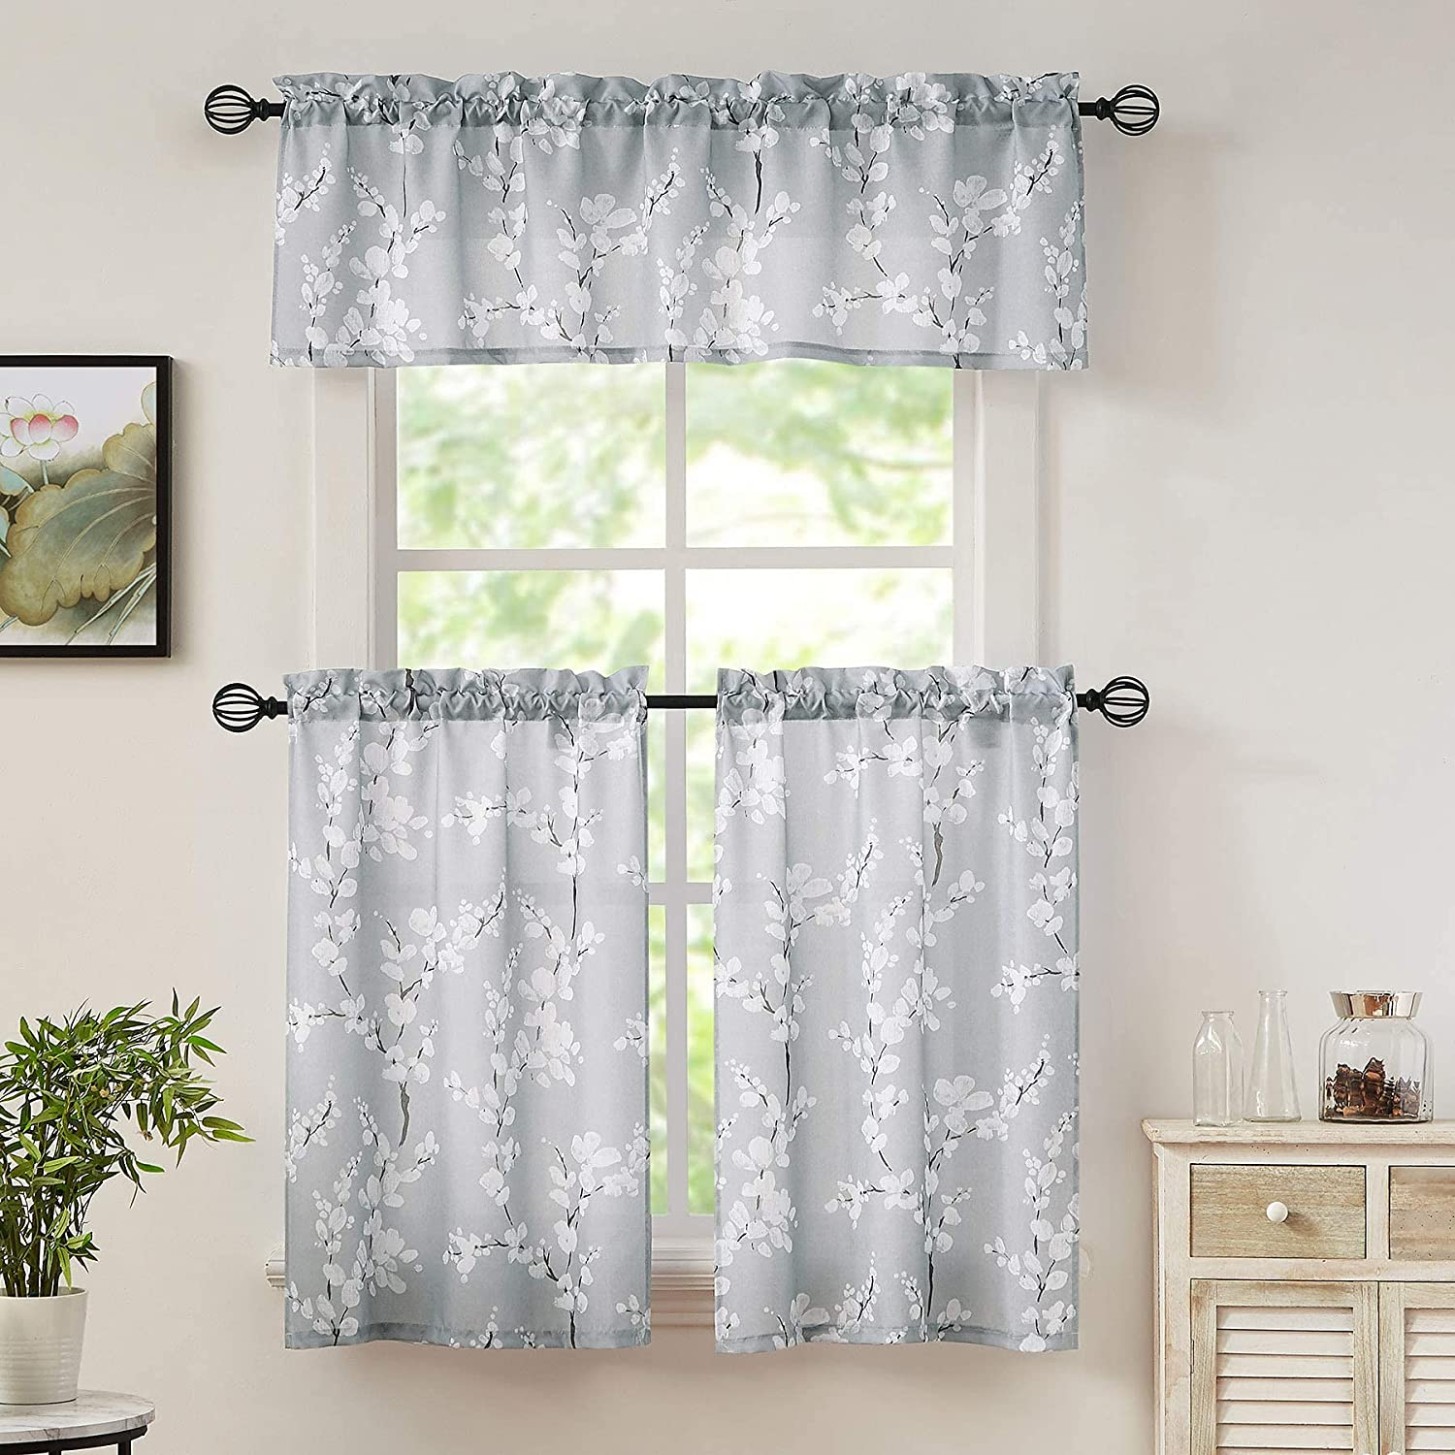 FMFUNCTEX Blossom Printed Tiers Kitchen Curtains 4inch Length Grey-White  Small Window Curtains for Bathroom Laundry Room Basement Rod Pocket Modern   - grey kitchen curtains